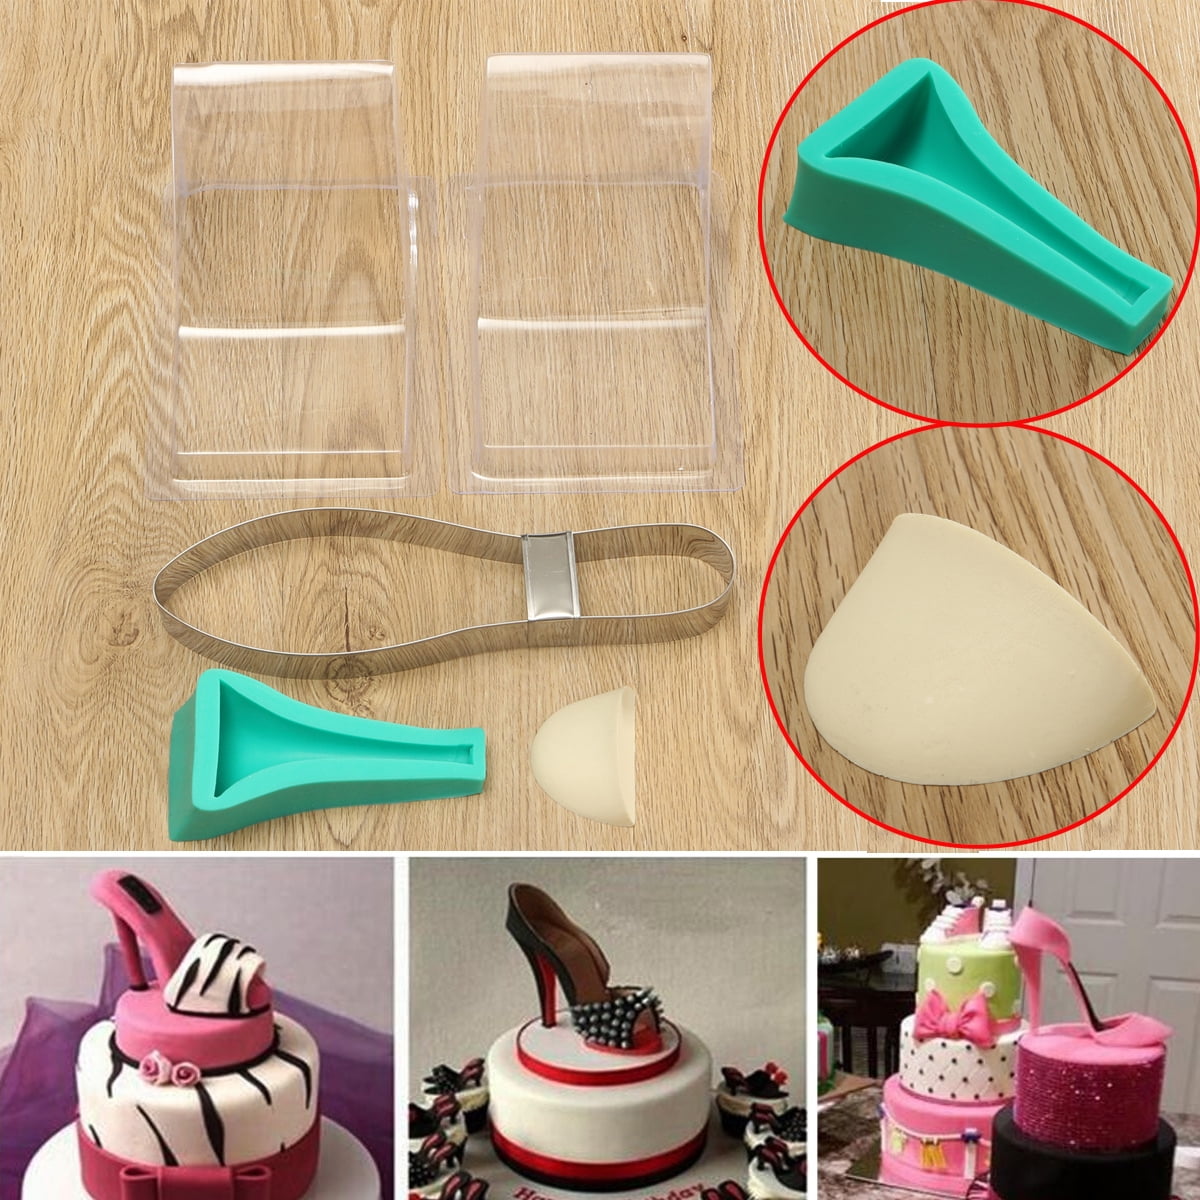 Kit Moulds Cake Soap Mould 3D Sneaker Cake Decorating Tools Pastry Fondant Mold 